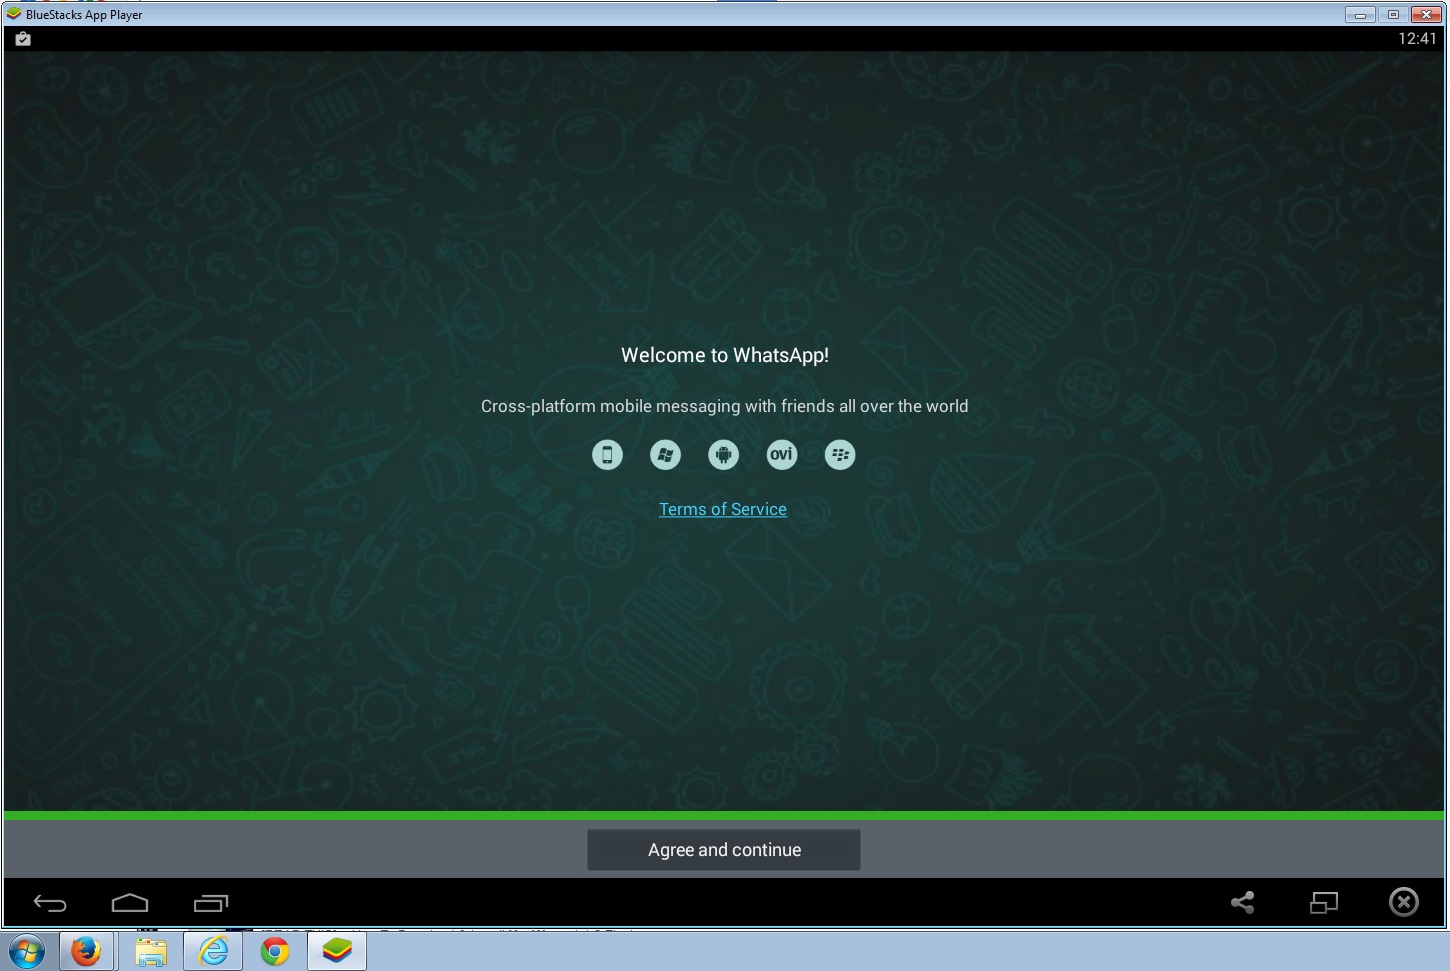 How to use WhatsApp on PC with Bluestacks